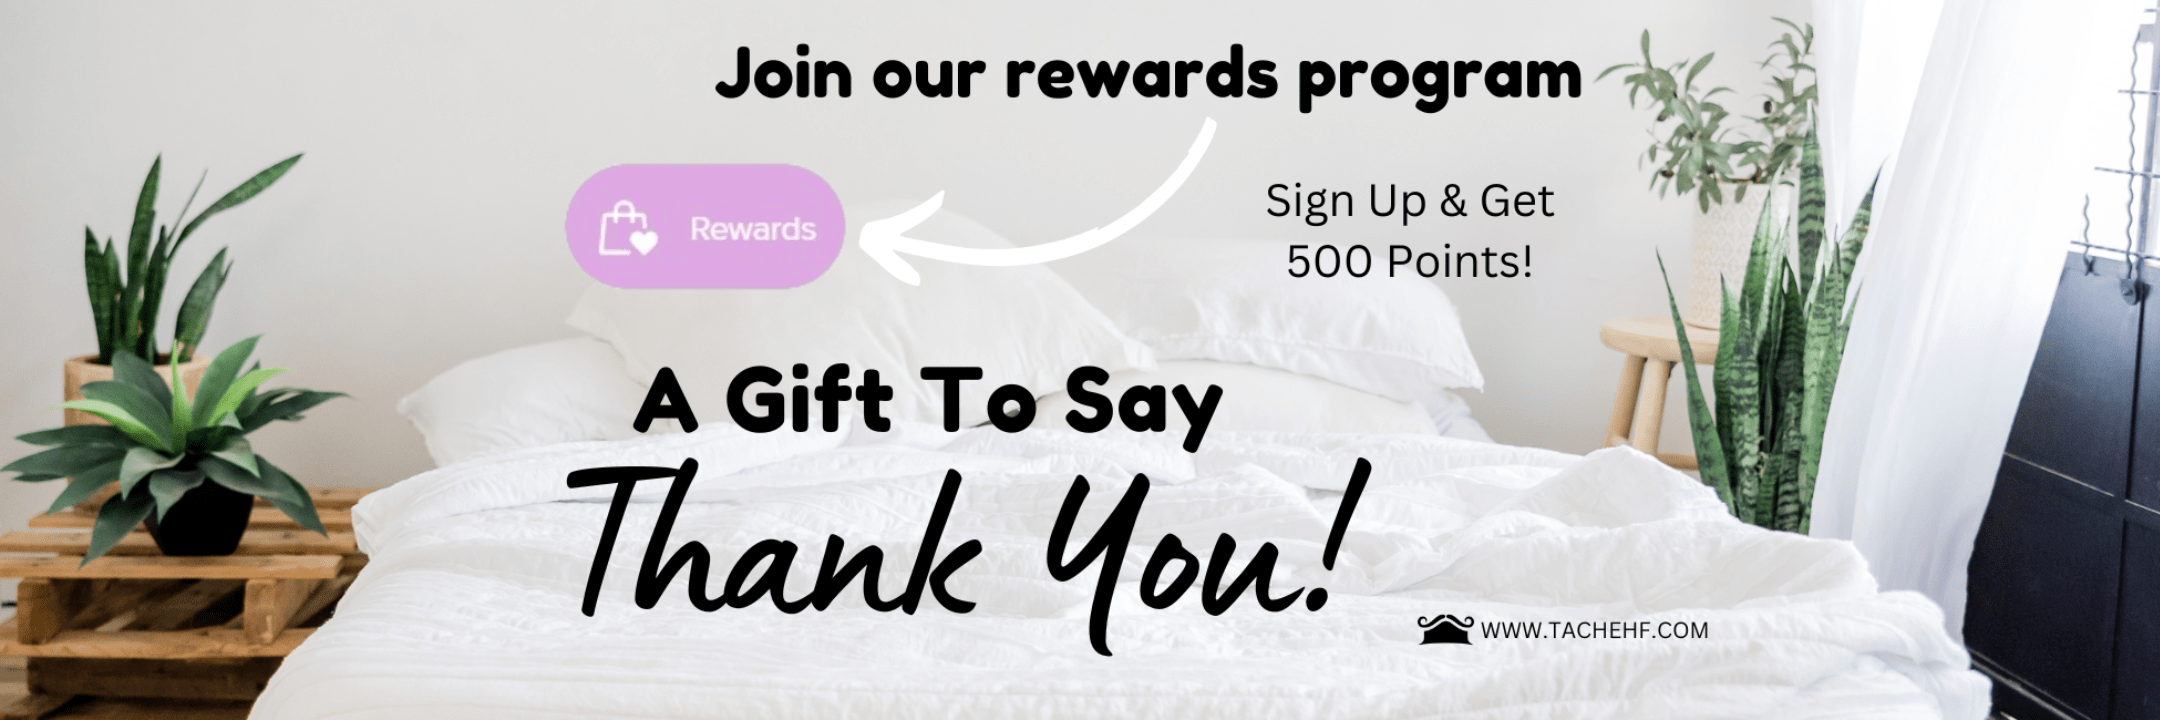 Join our rewards program. Sign up and get 500 points! A gift to say thank you! www.tachehf.com Click to sign up for rewards.